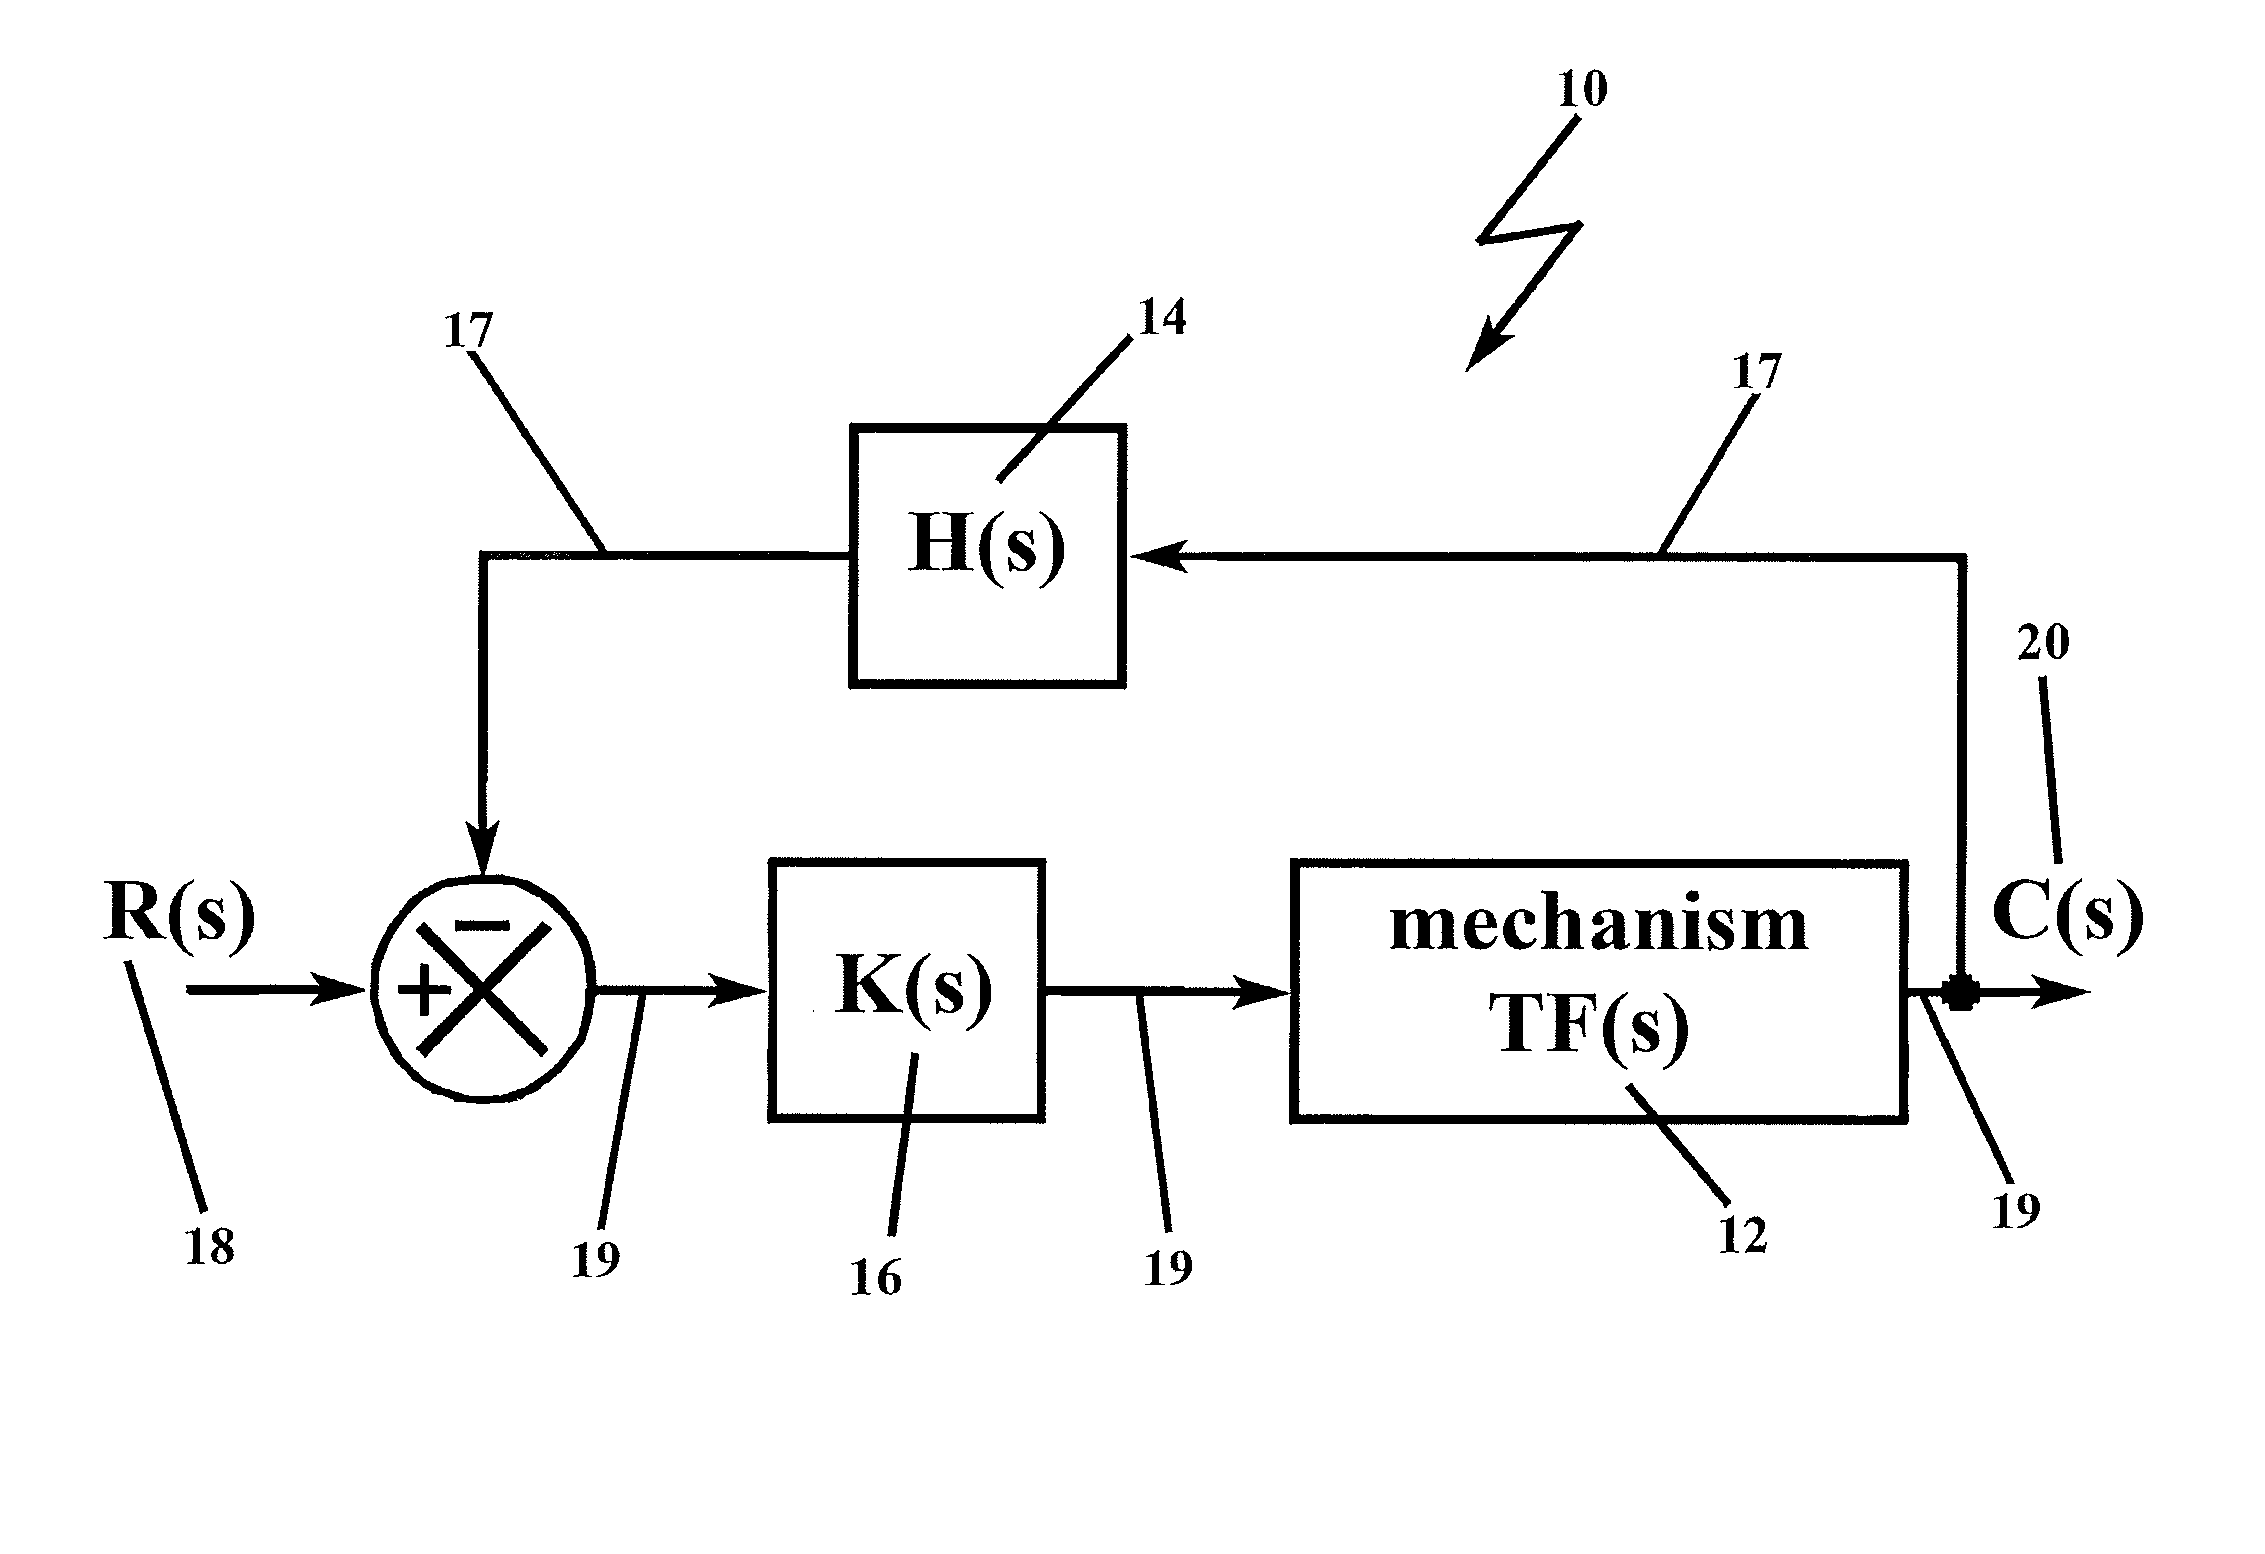 Compensation for canonical second order systems for eliminating peaking at the natural frequency and increasing bandwidth